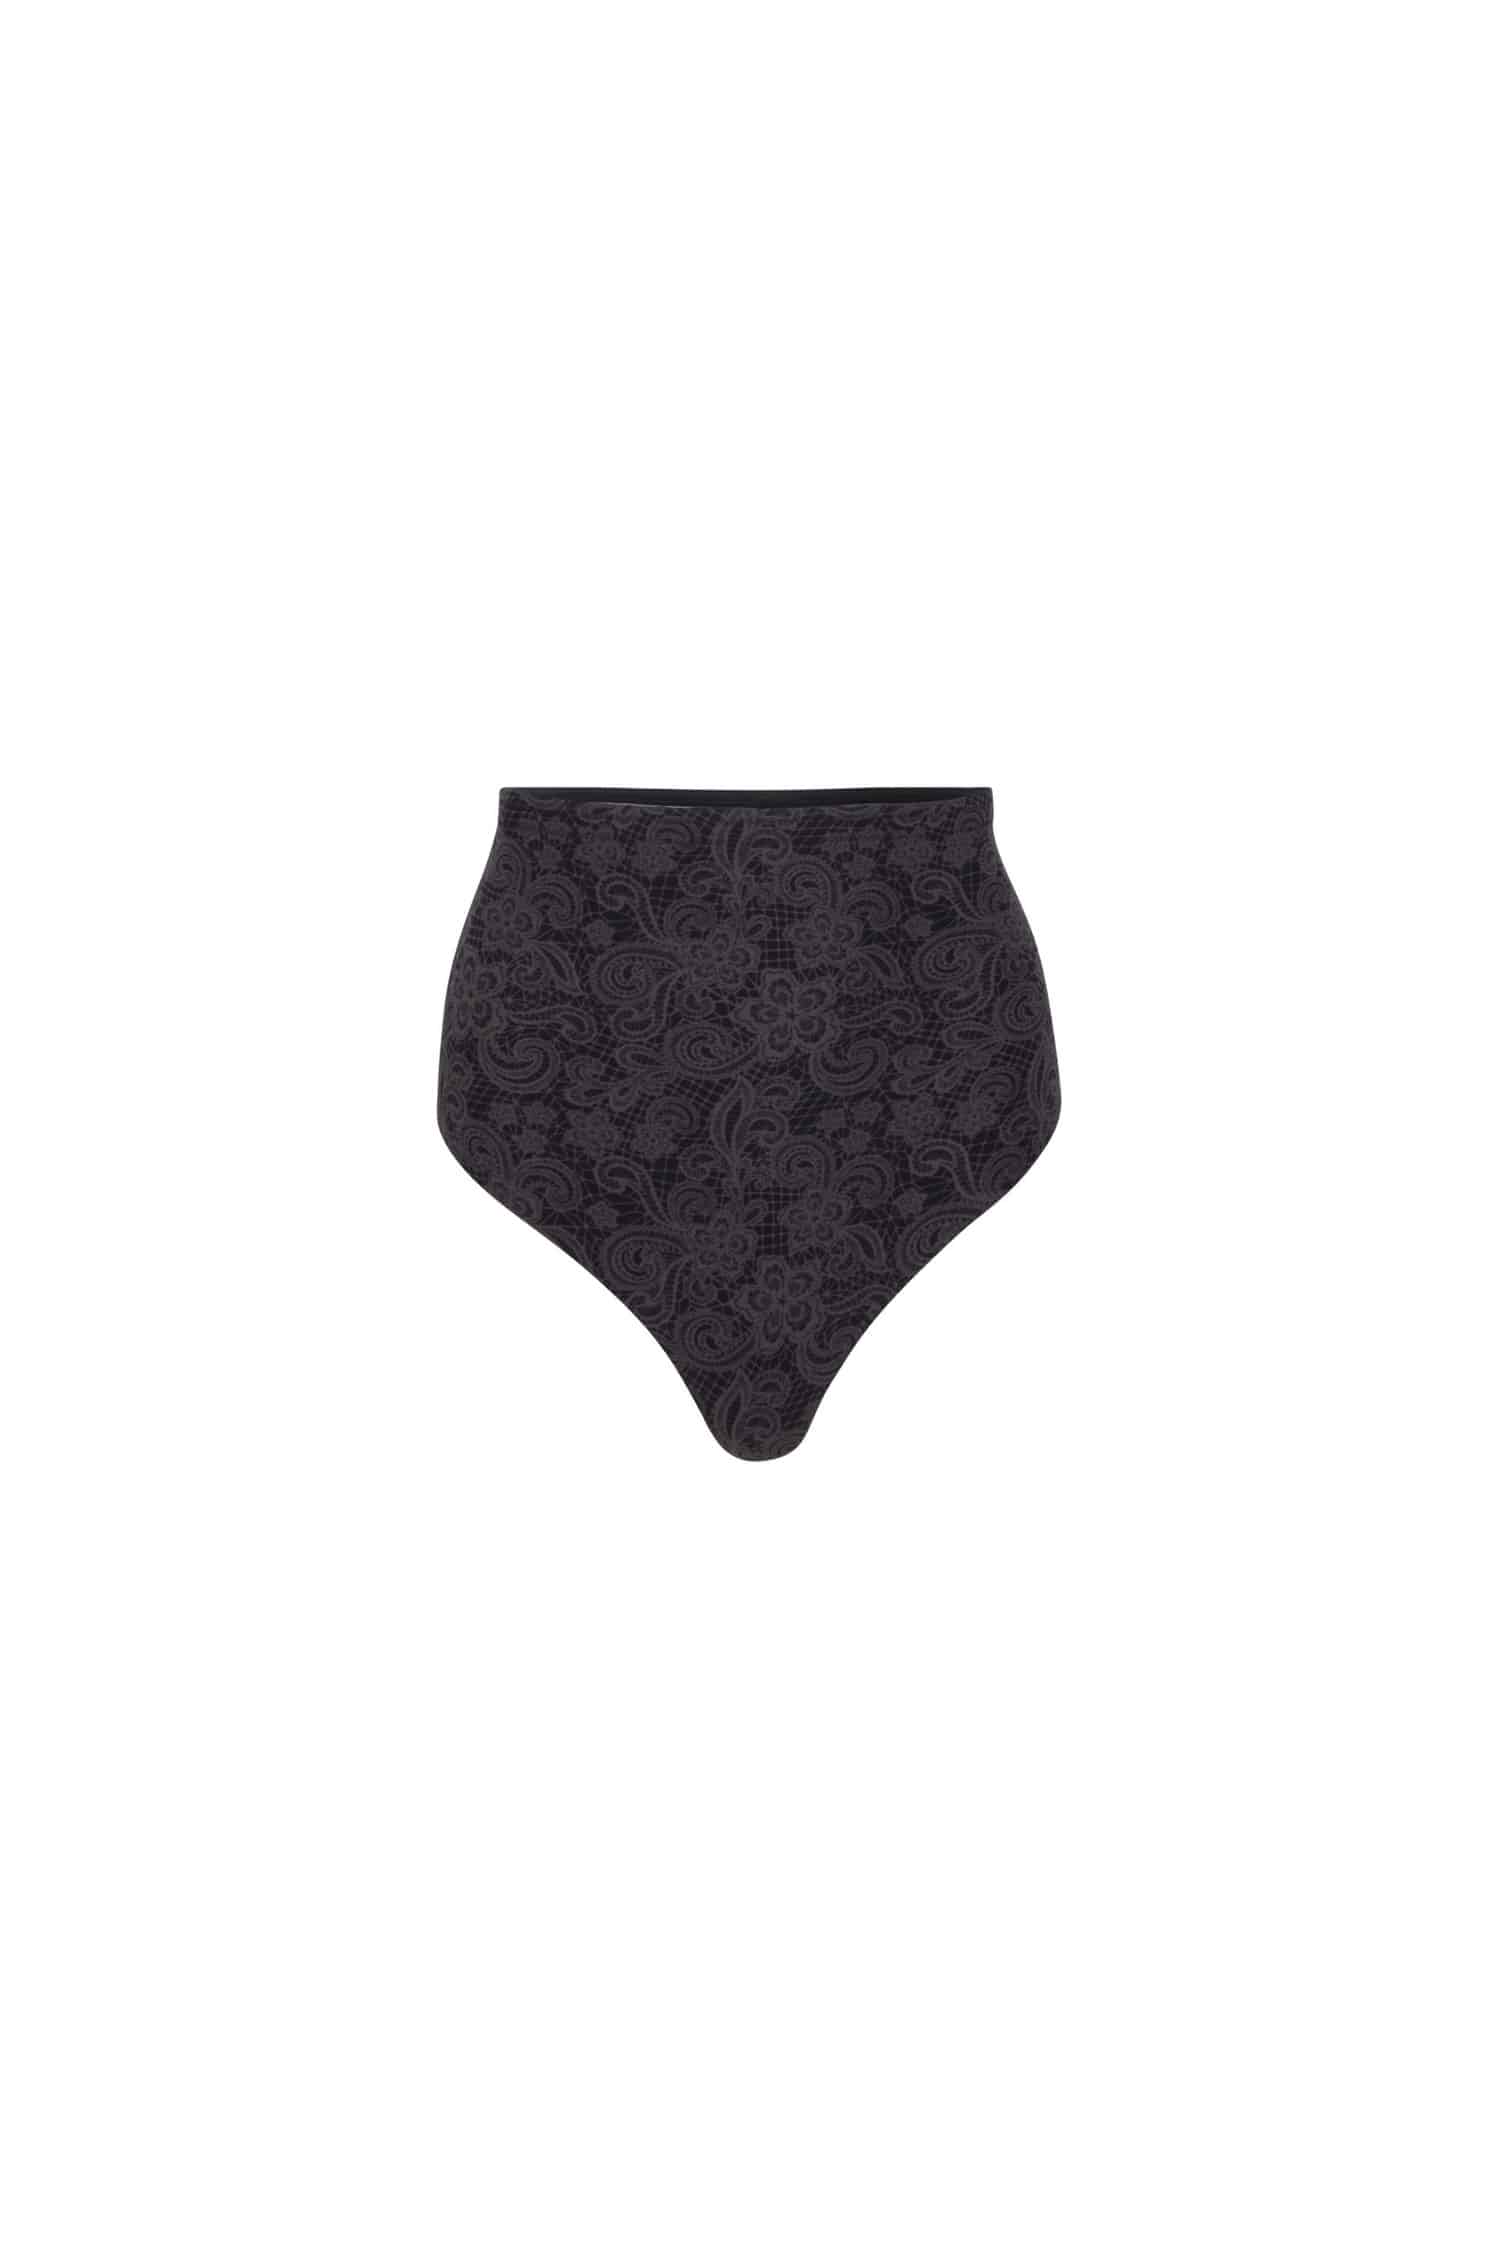 https://fashionweekdaily.com/wp-content/uploads/2022/01/HAARTLIEU-9810008P-IN-CONTROL-THONG-BLACK_9735-scaled.jpg